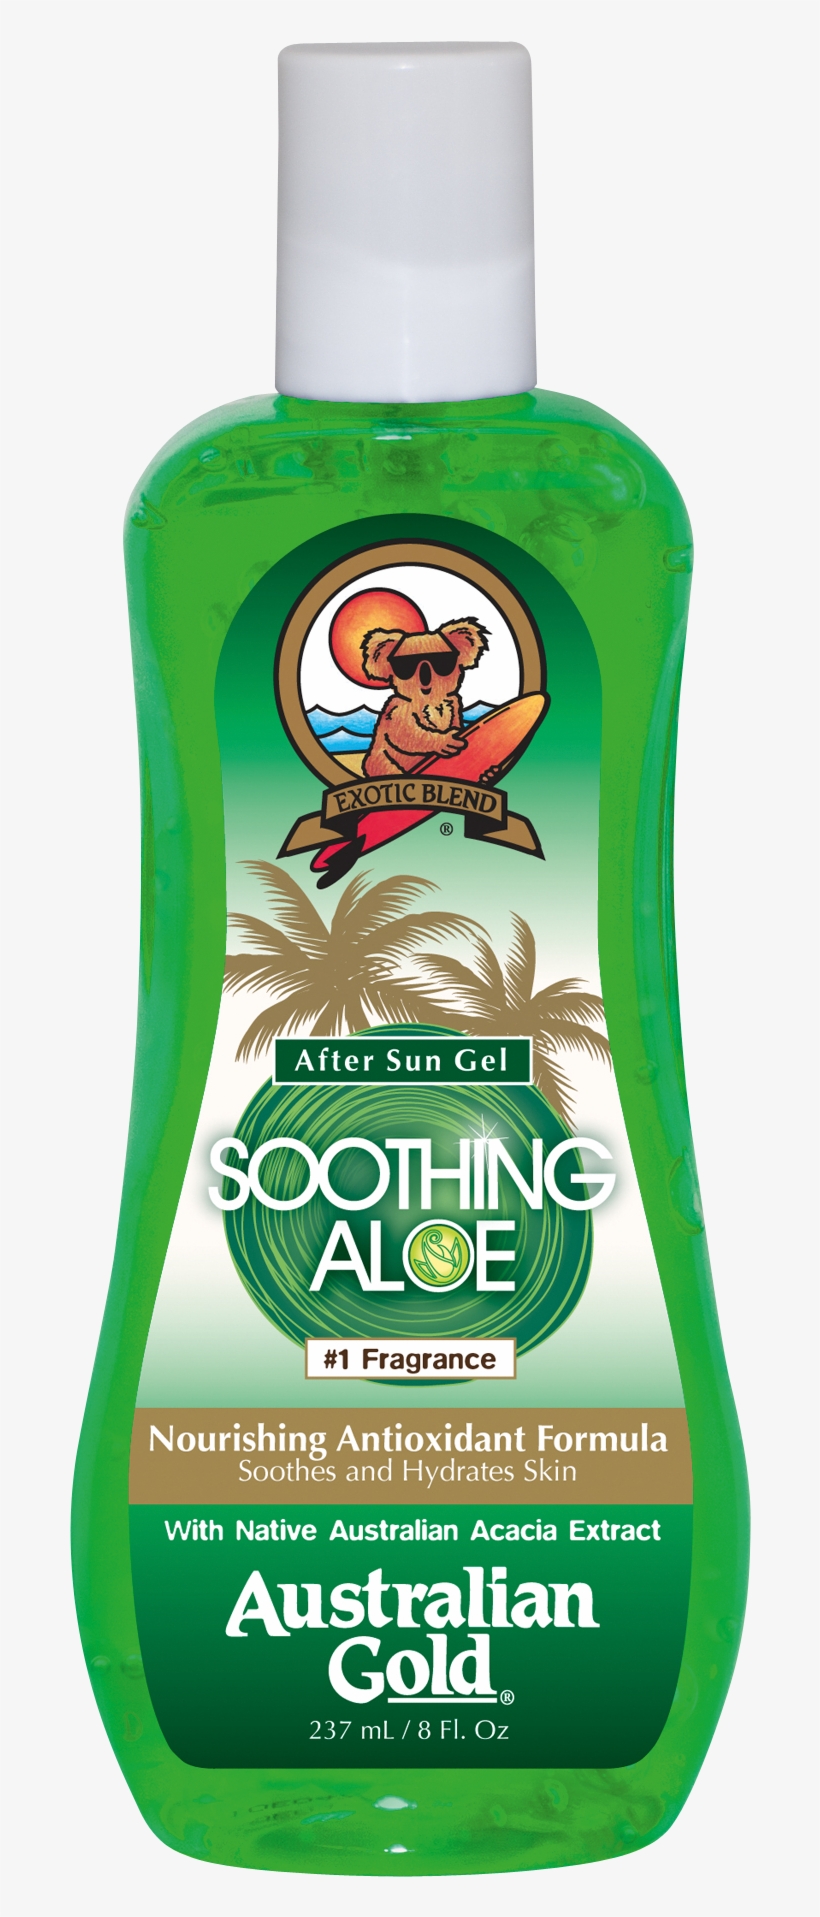 Ag Soothing Aloe Aftersun Cooling - Australian Gold Soothing Aloe After Sun Gel 237 Ml, transparent png #1374122